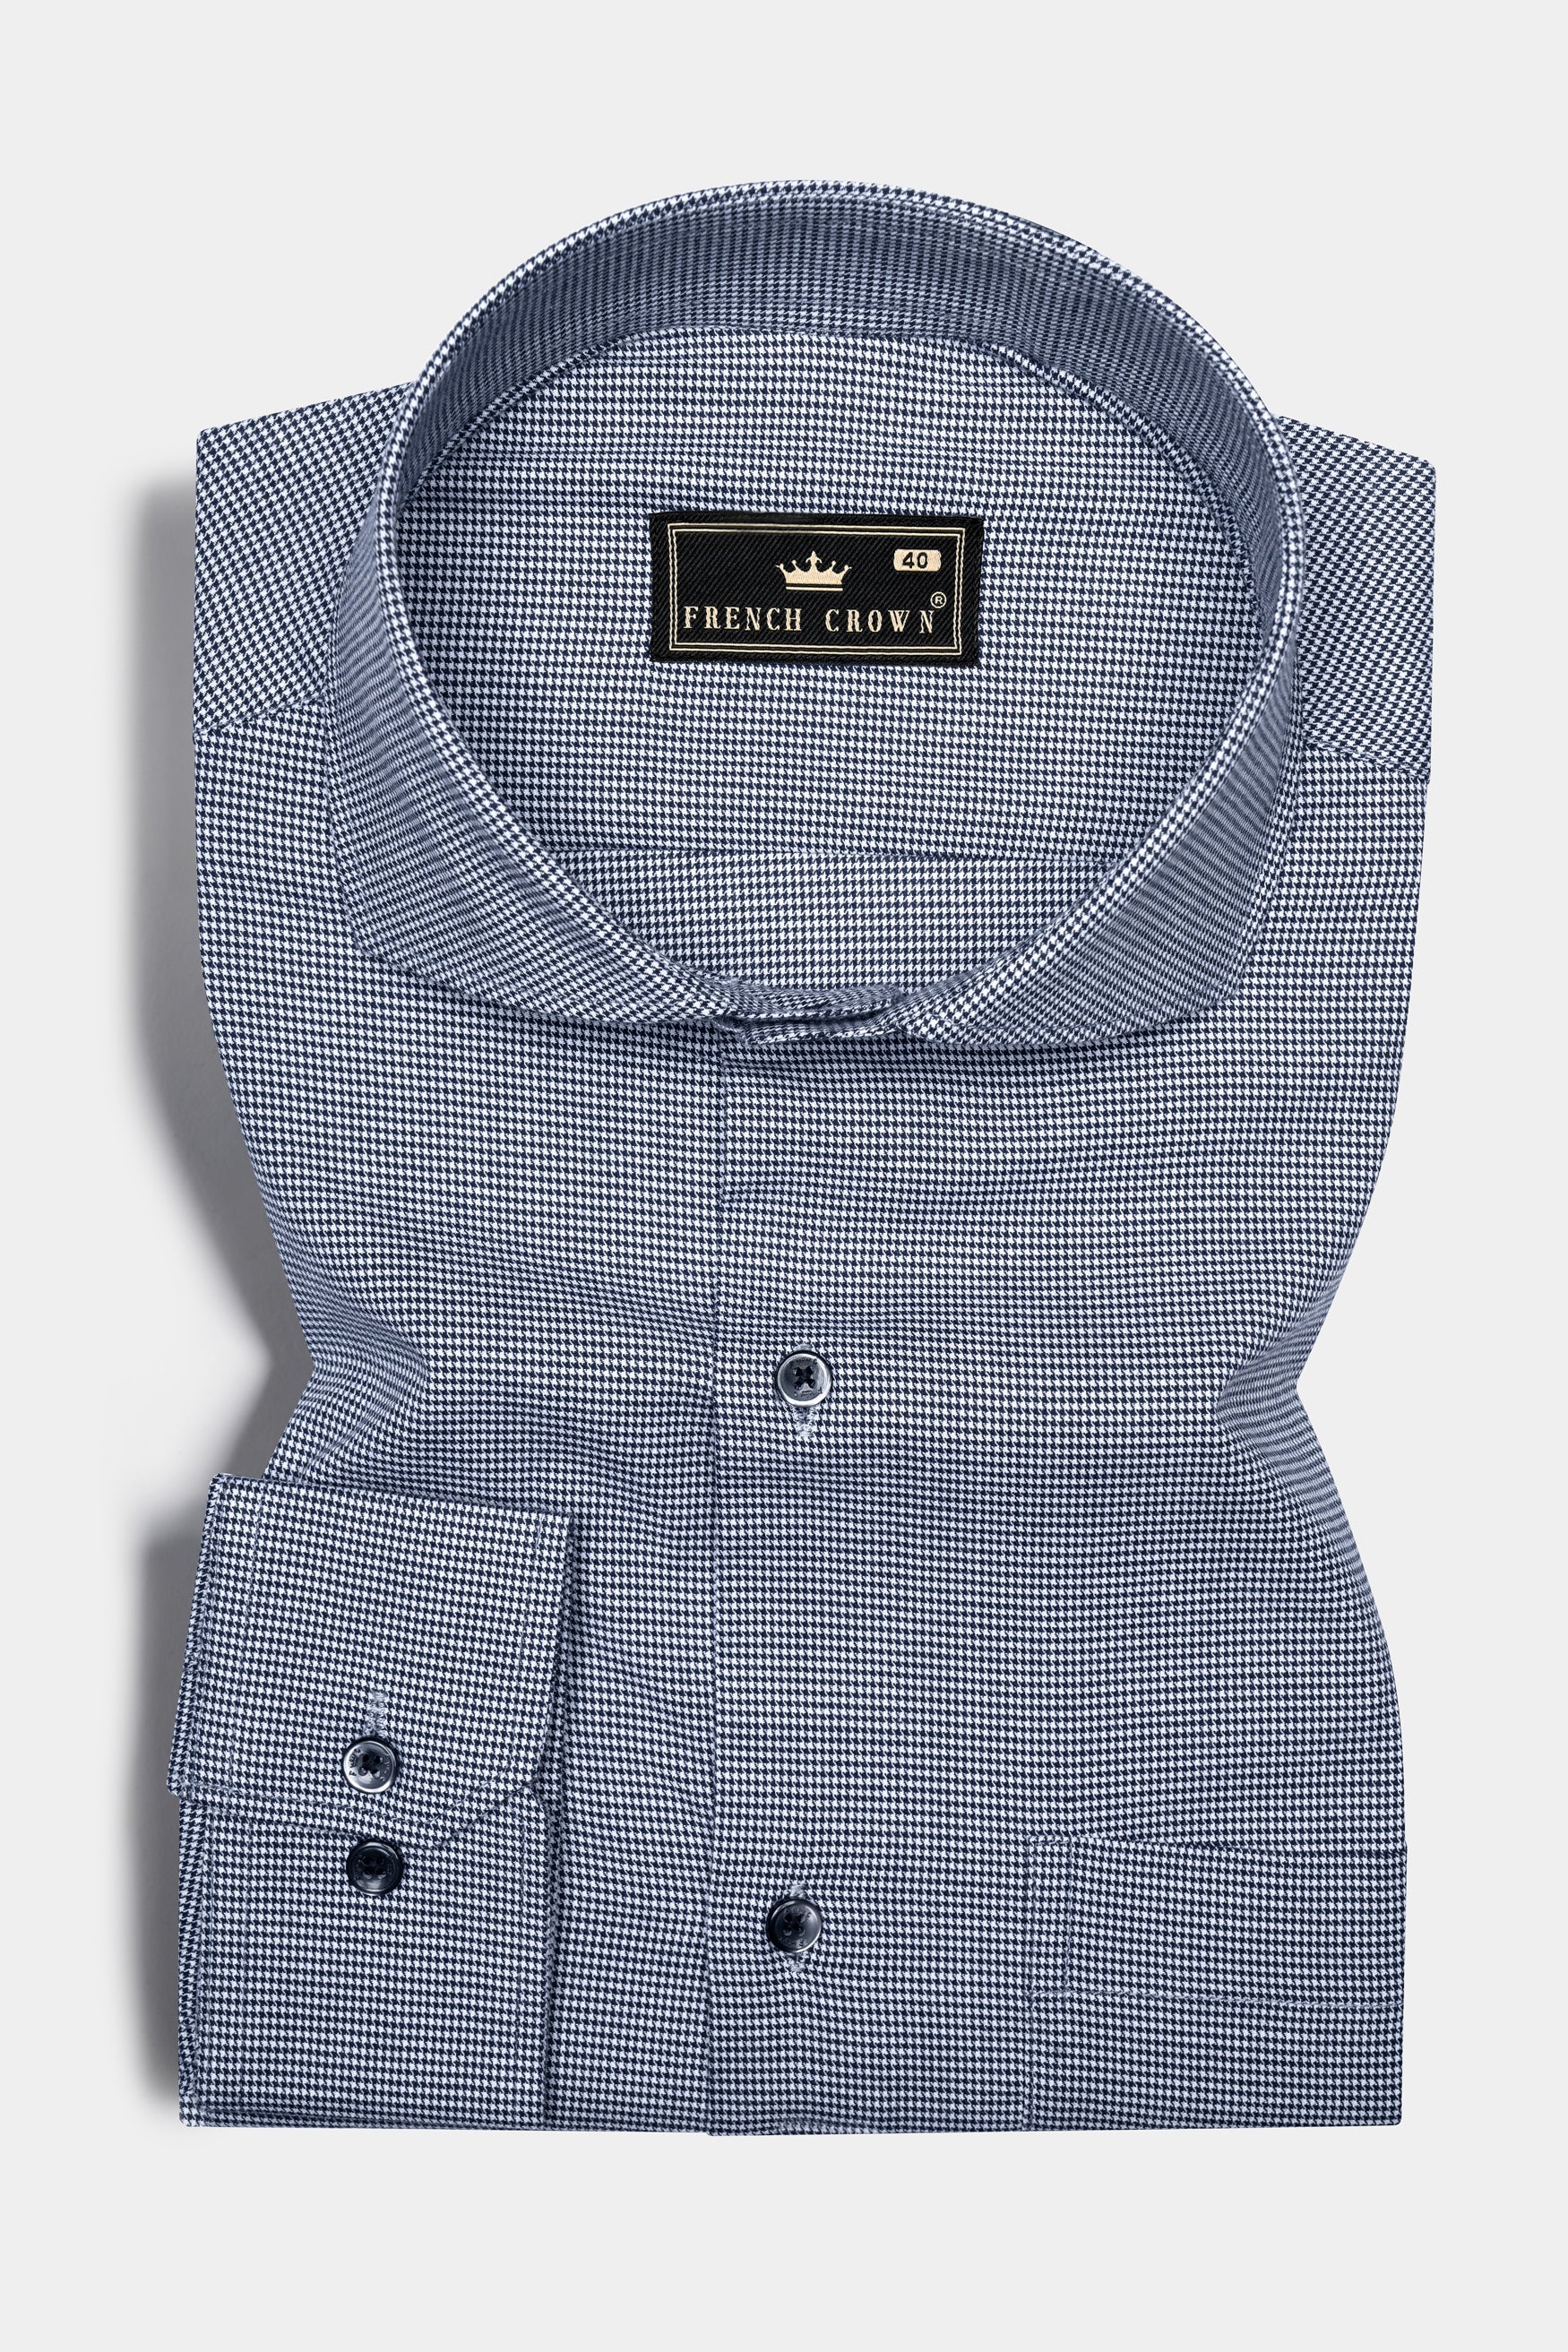 Mirage Blue with White Mini checkered Houndstooth Shirt